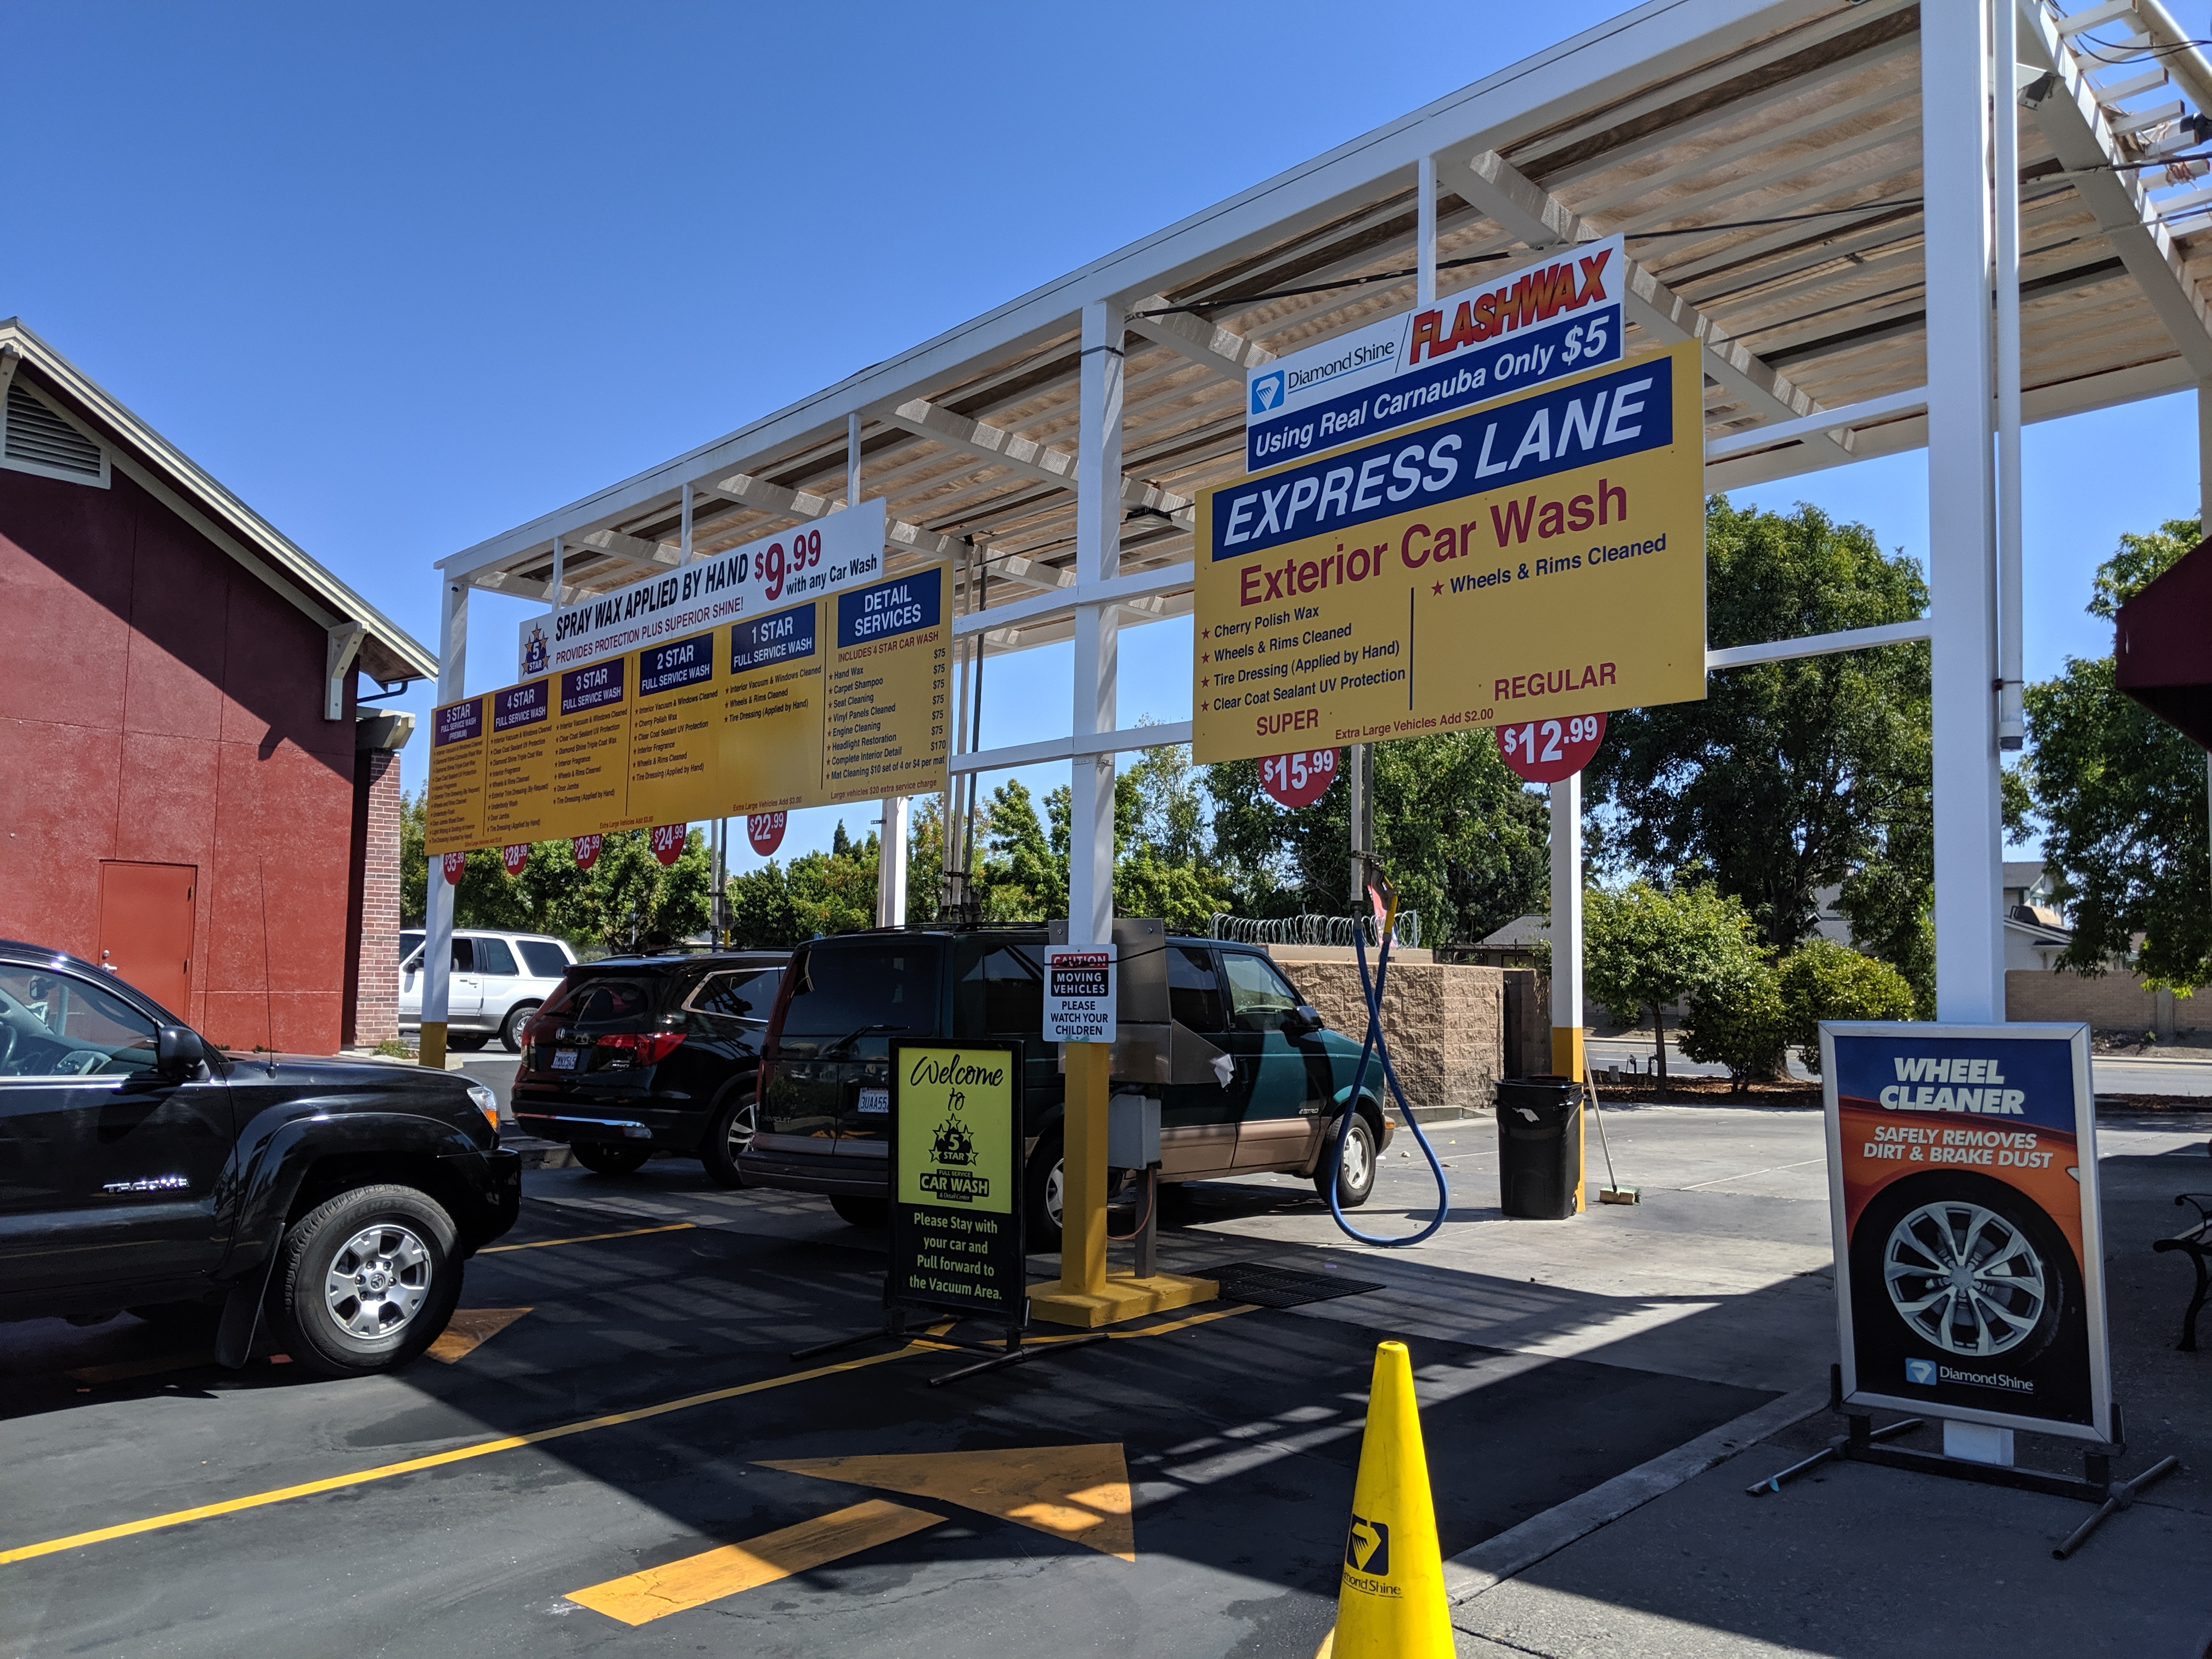 vallejo full service car wash and detail center - 7-flags car wash on vallejo car wash prices